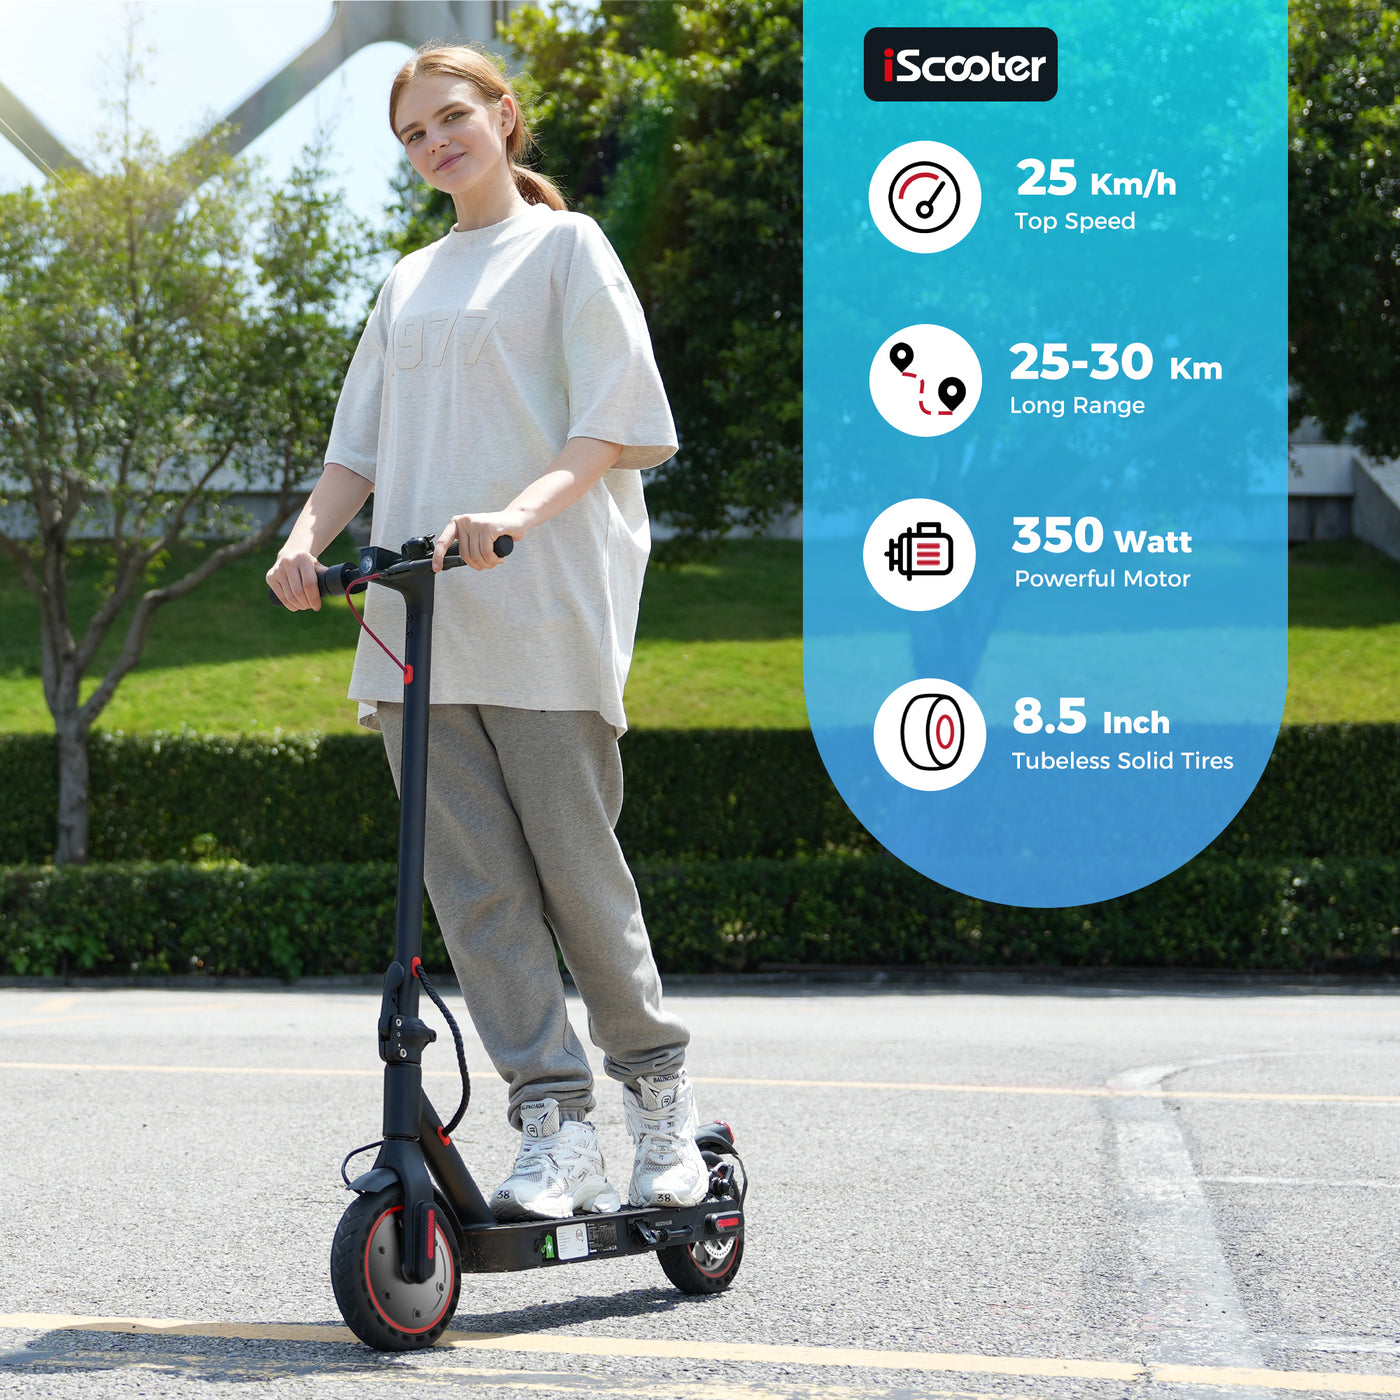 iScooter i9 Electric Scooter 8.5-Inch Solid Tires